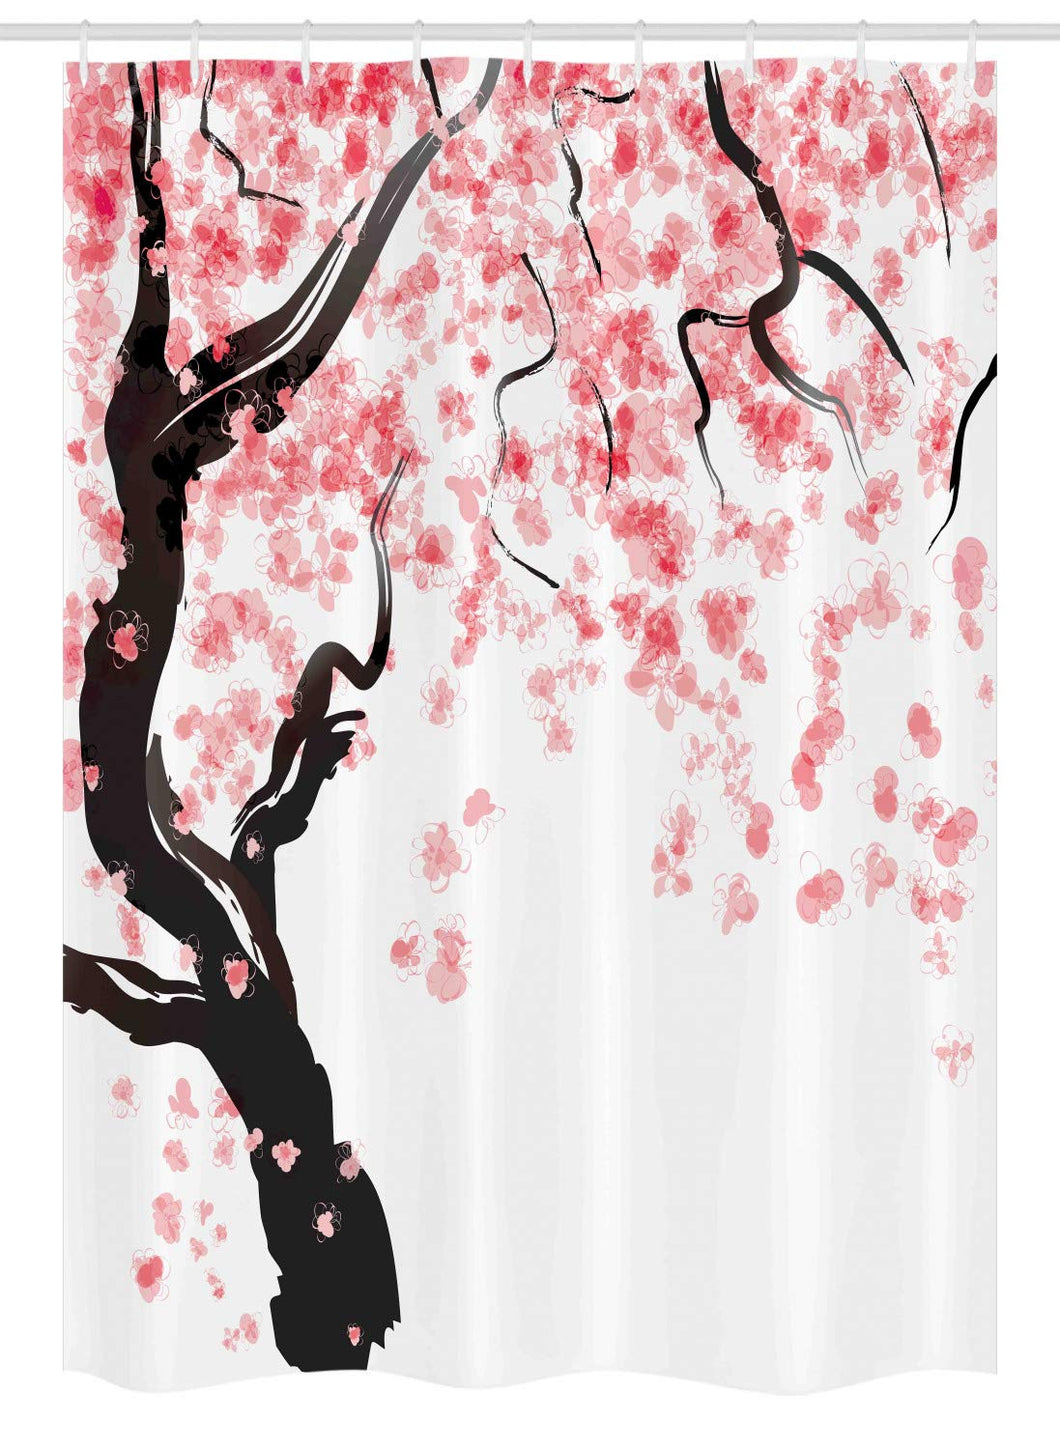 Ambesonne Floral Stall Shower Curtain, Dogwood Tree Blossom in Watercolor Painting Effect Spring Season Theme Pinkish Tones, Fabric Bathroom Decor Set with Hooks, 54